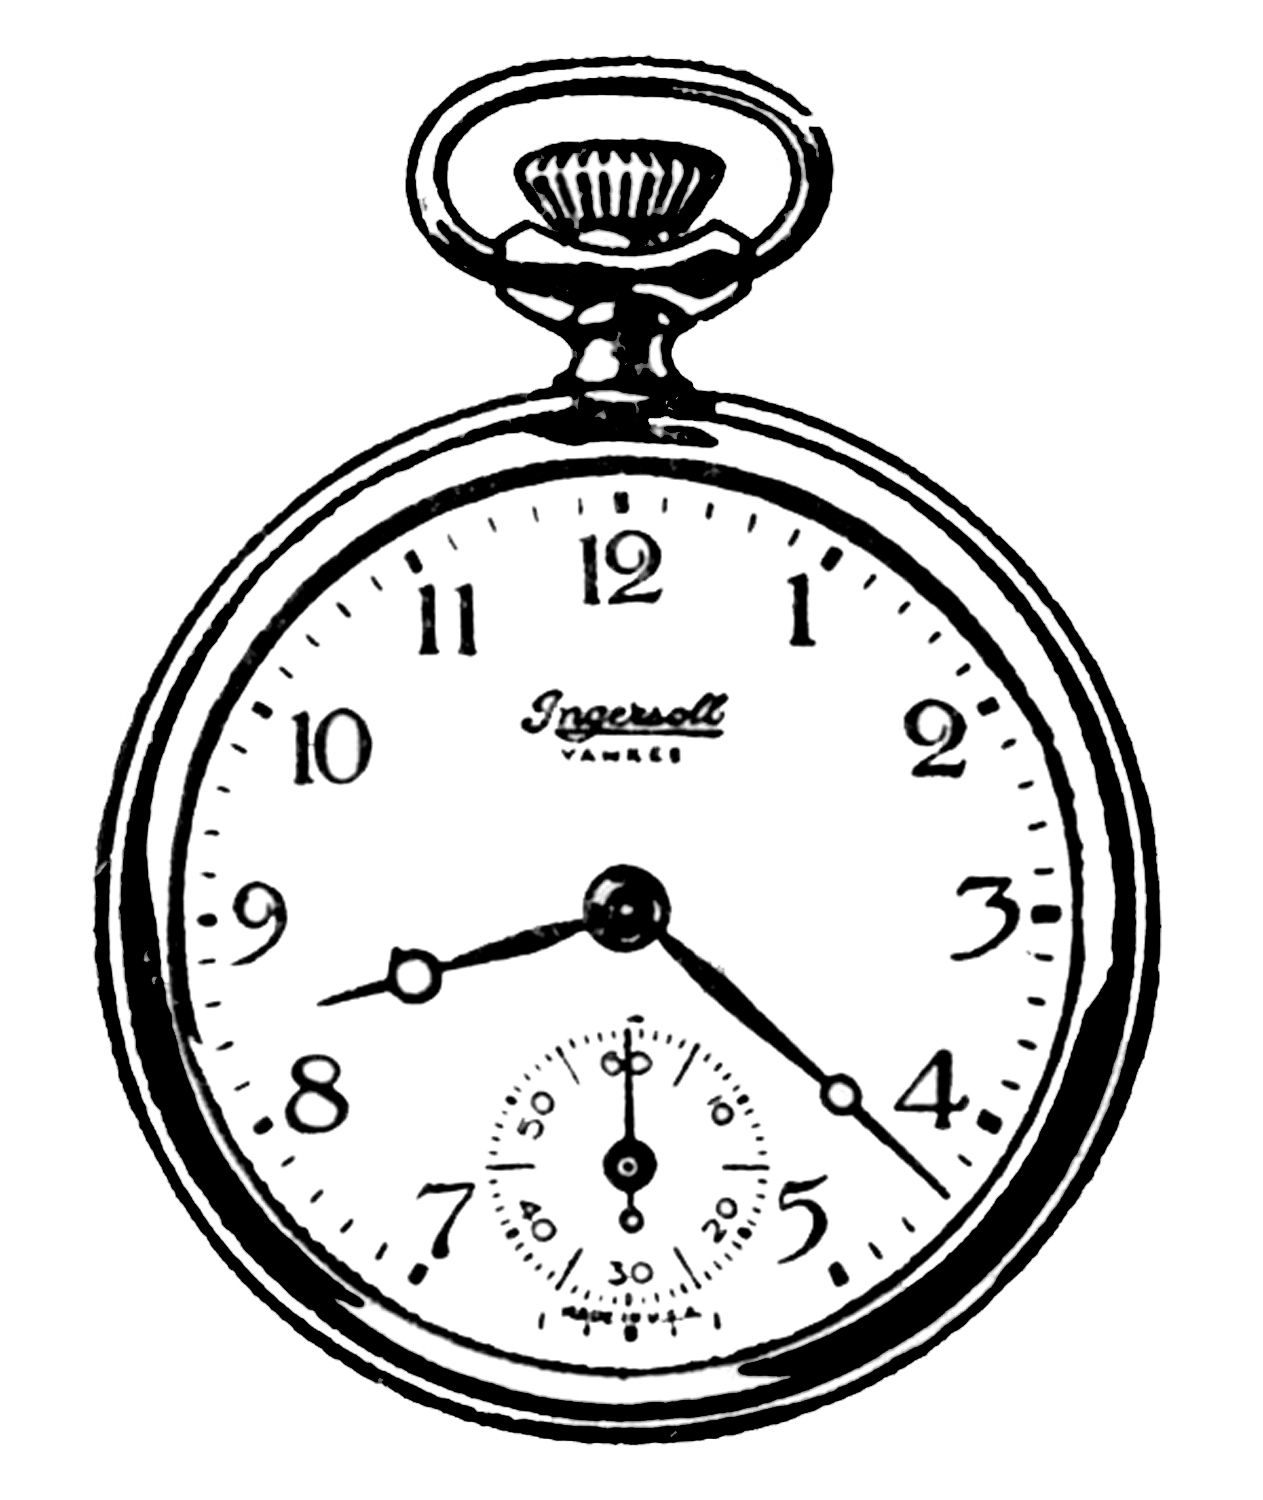 clipart of watches and clocks - photo #33